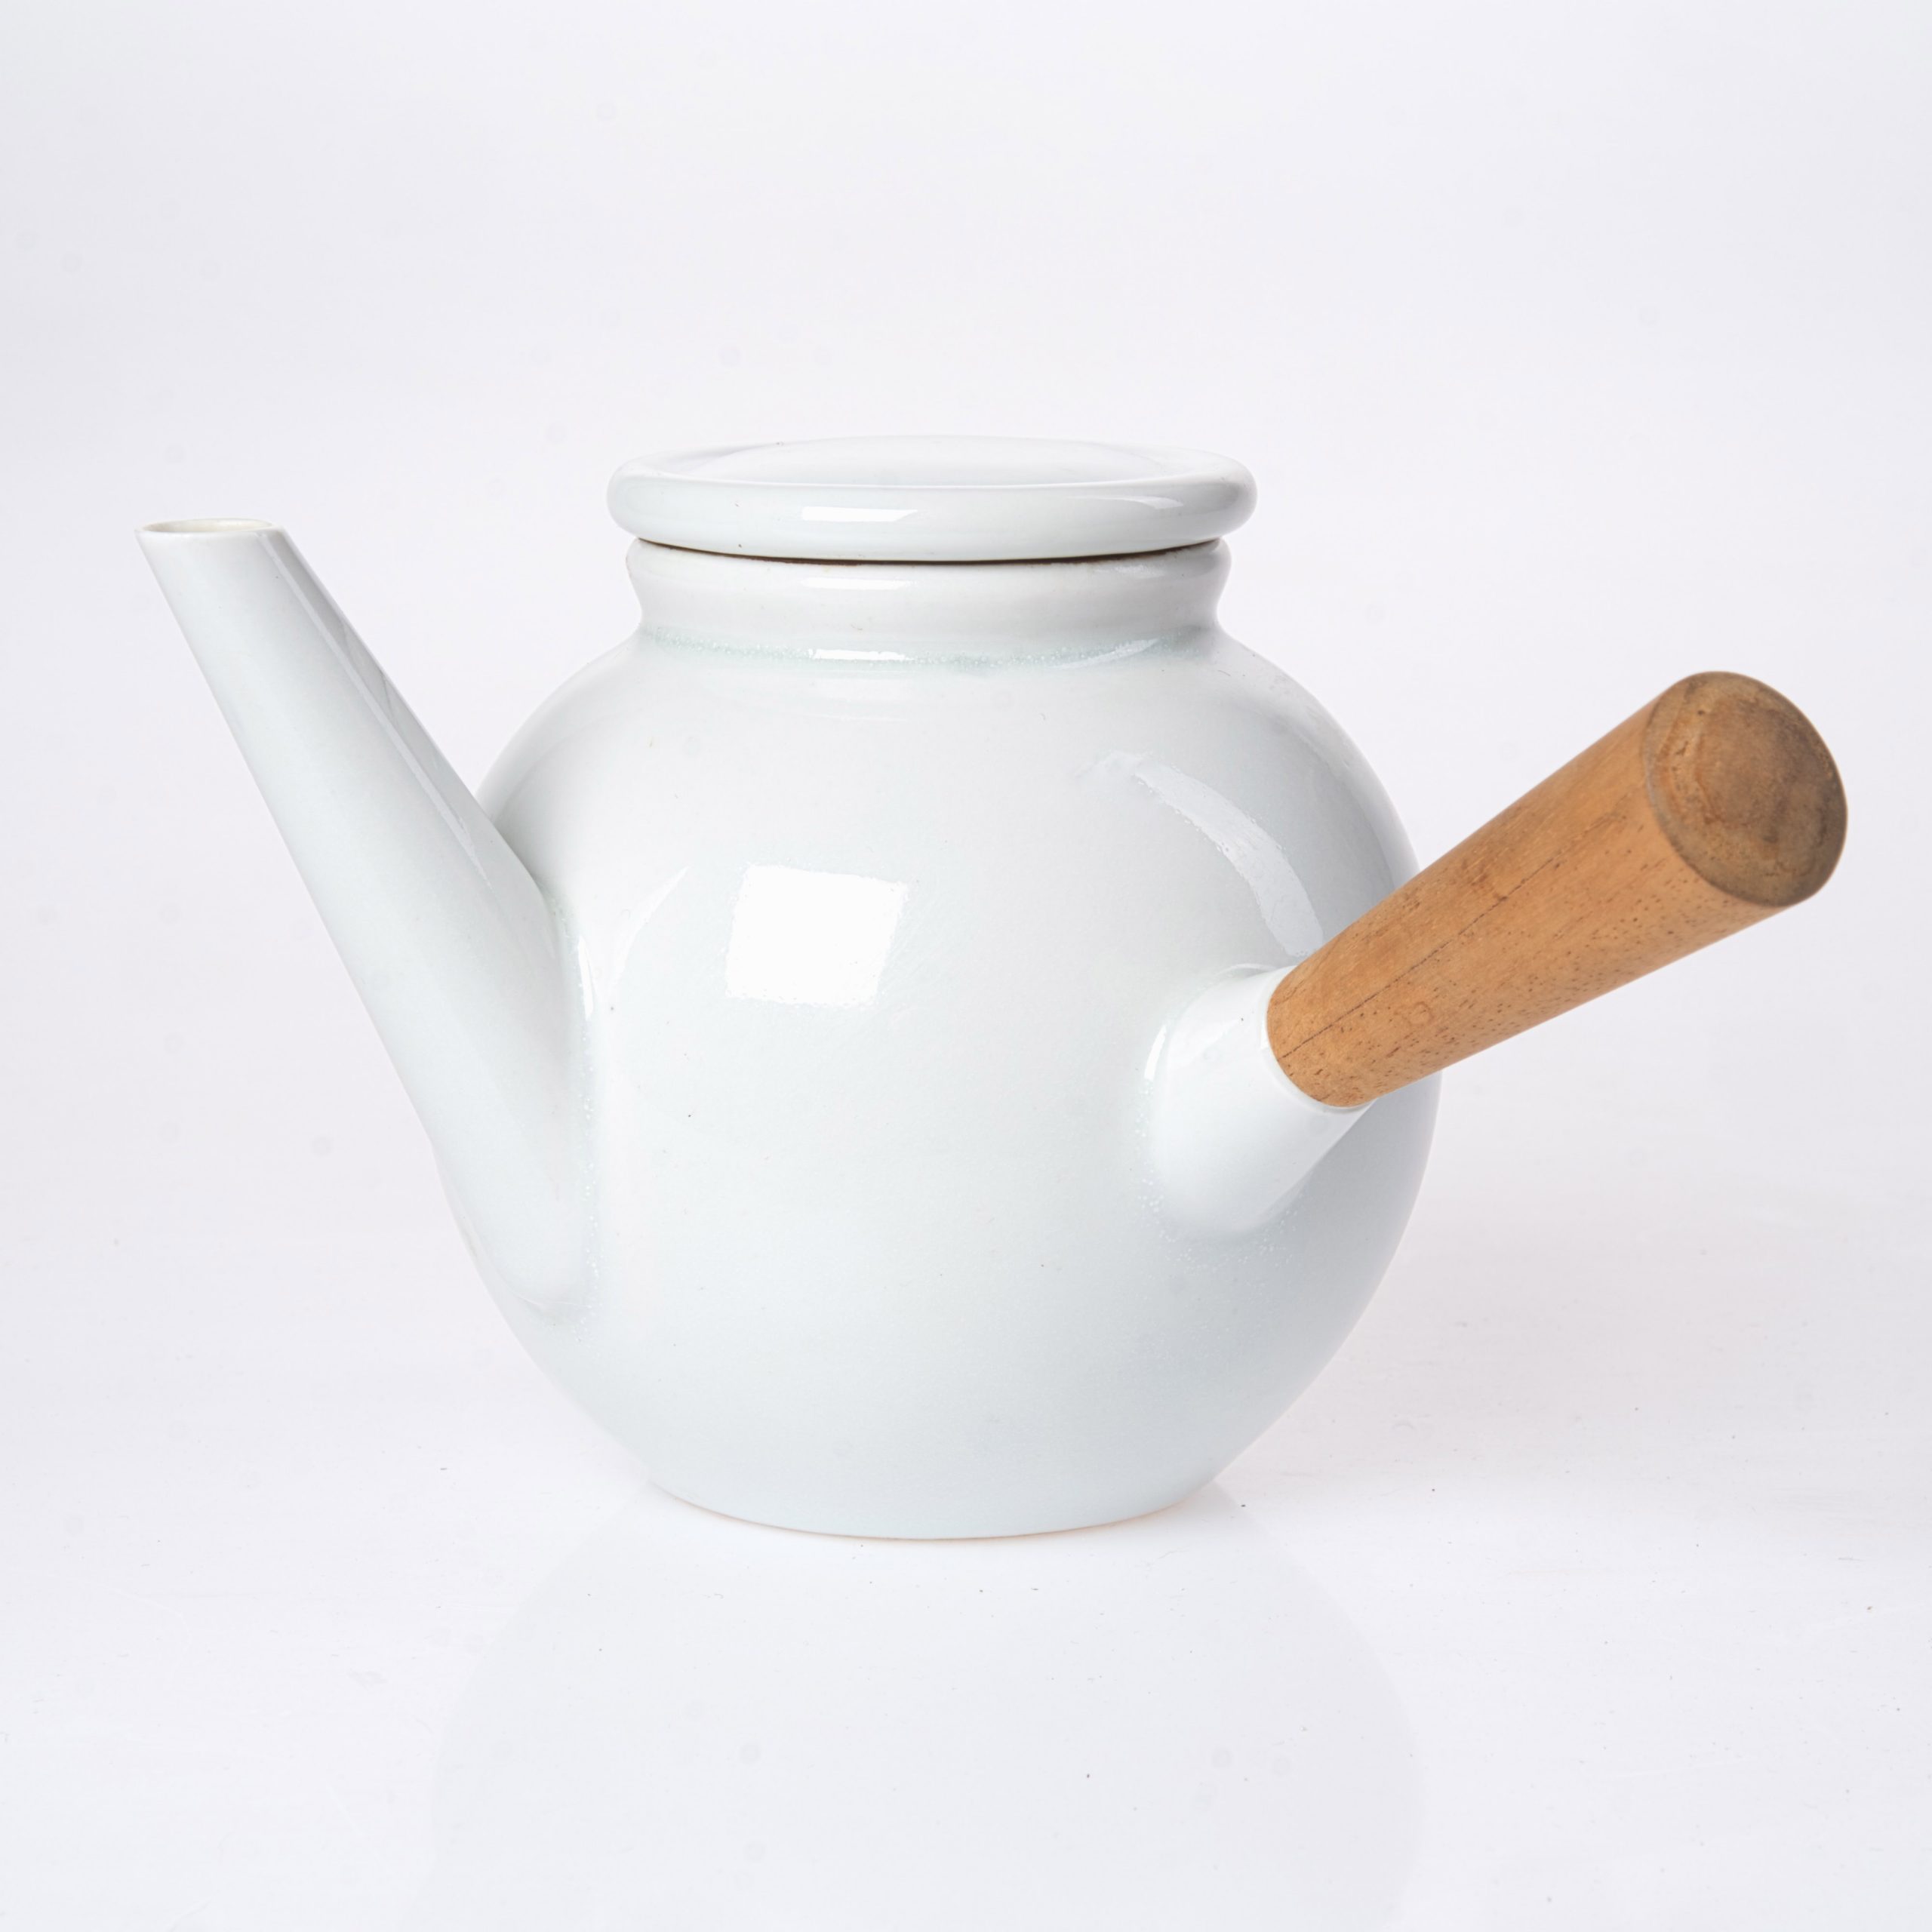 Ulla Sonne, The Geometric Teapot, 4 1/2 in. (12 cm) in height, porcelain, clear glaze, fired to 2300°F (1260°C), Mahogany